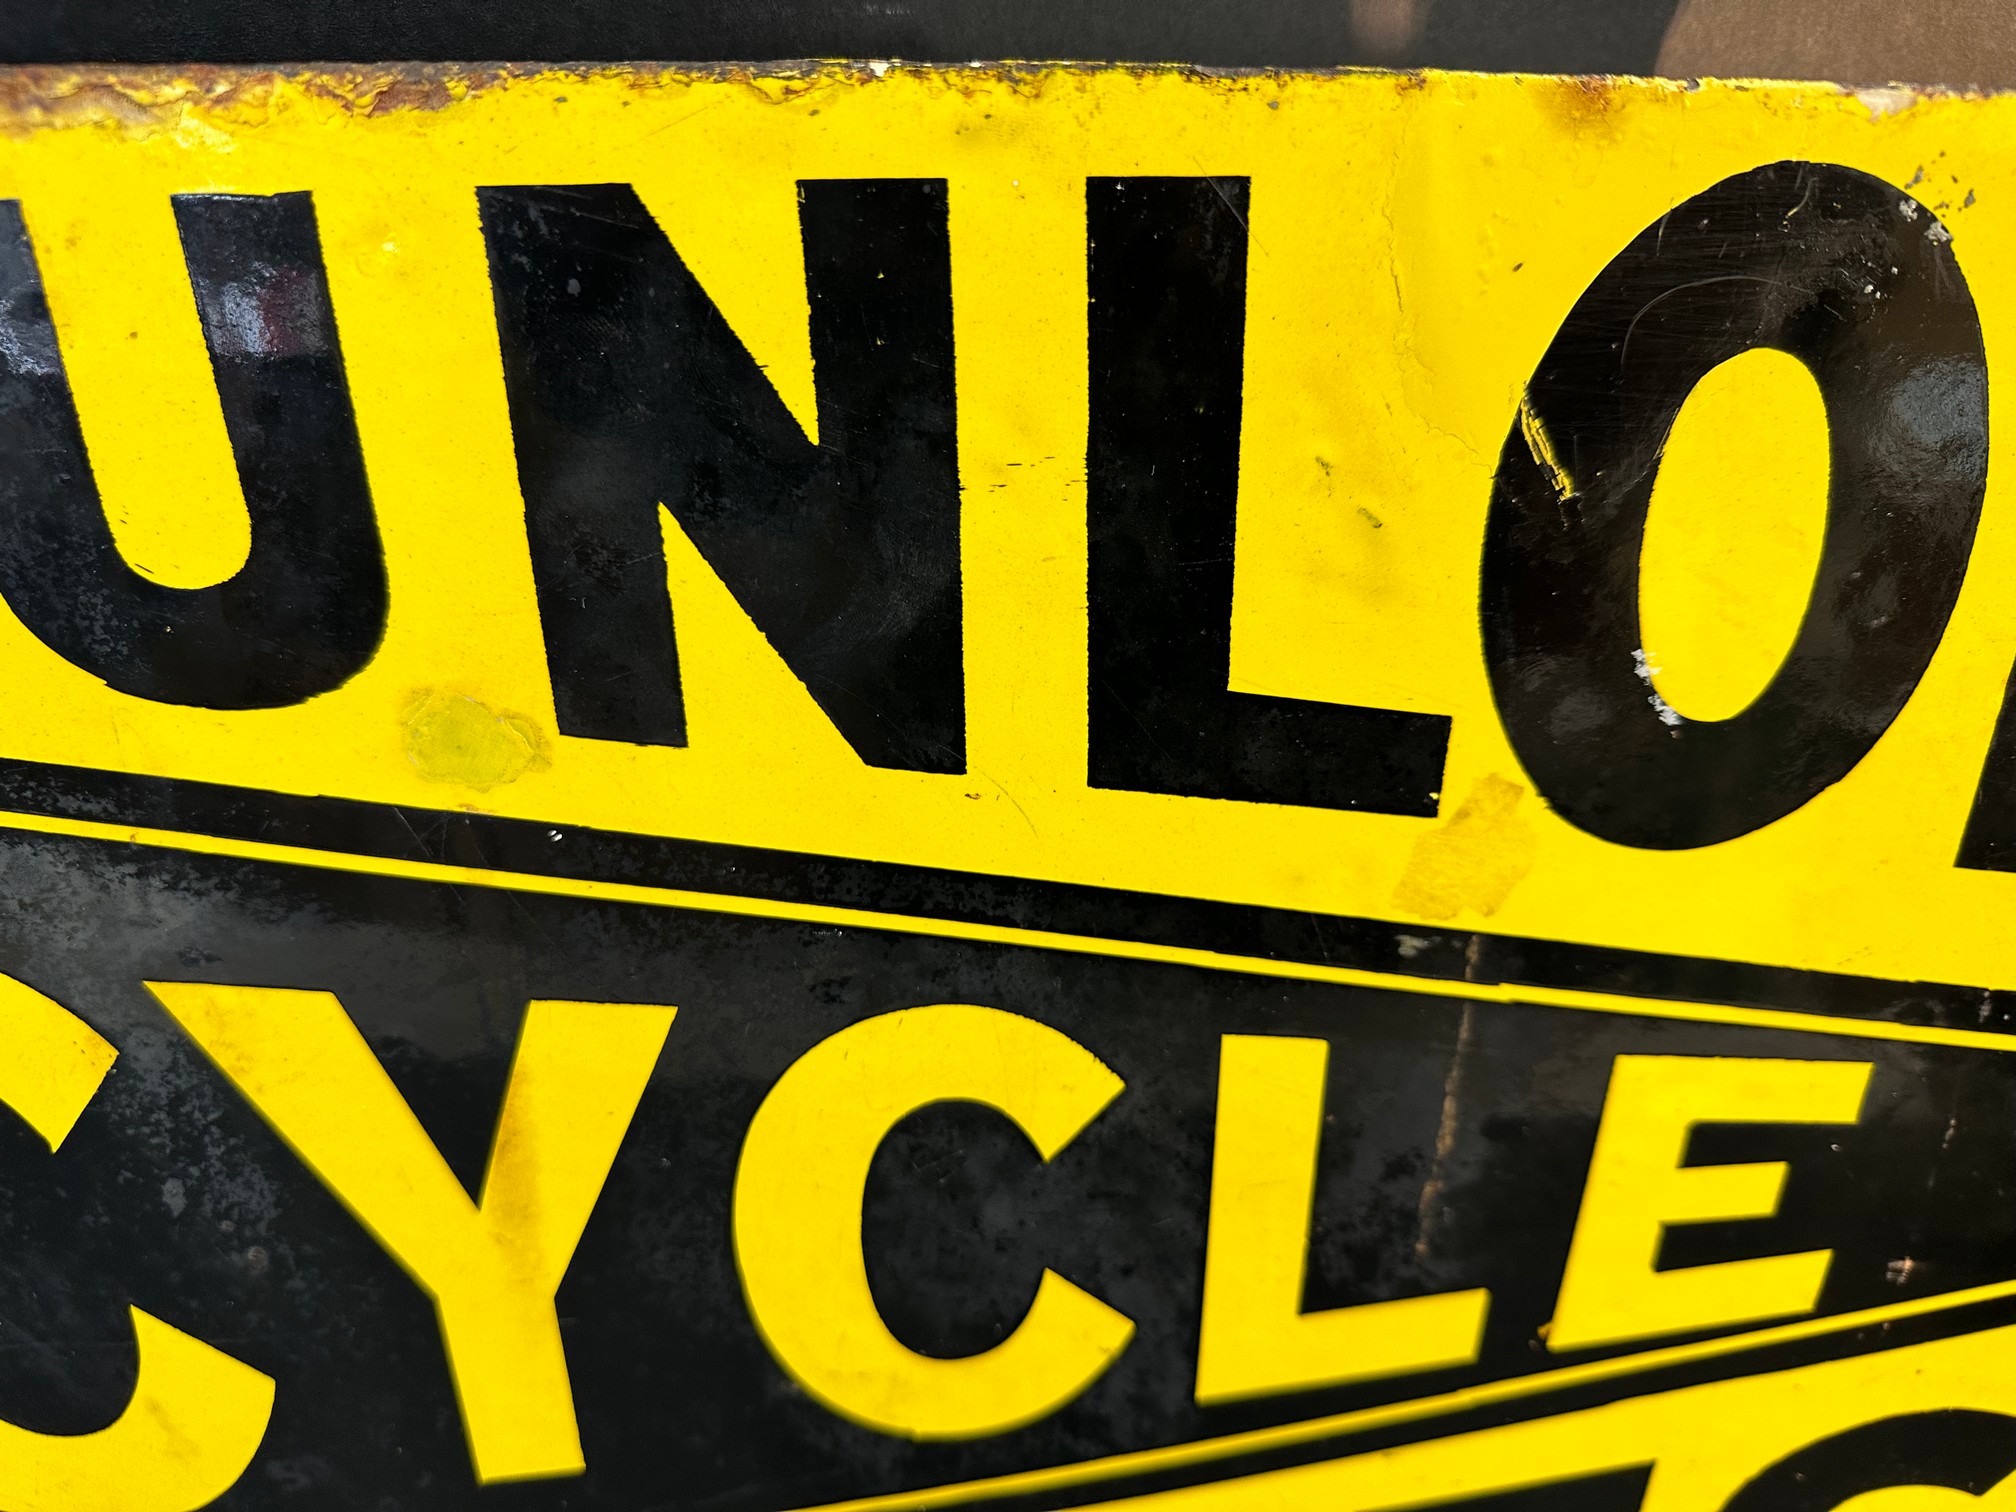 A Dunlop Cycle Tyres In Stock Here double sided enamel sign with hanging flange, some older spots of - Image 7 of 9